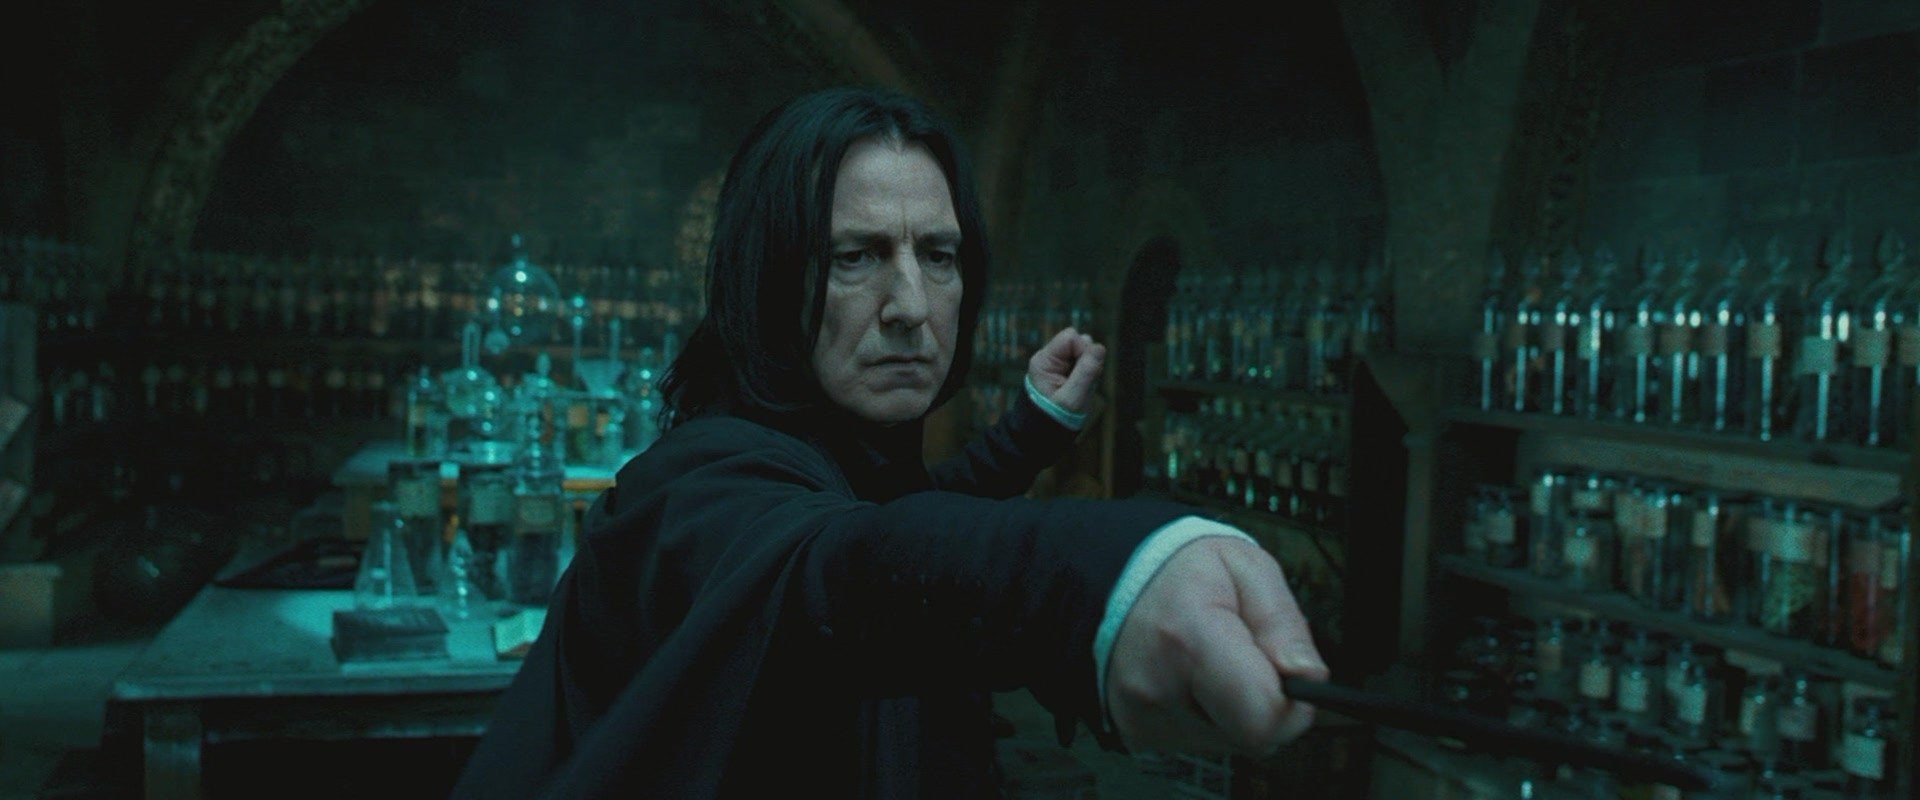 Snape in a dungeon, surrounded by glass bottles, pointing his wand at someone off camera